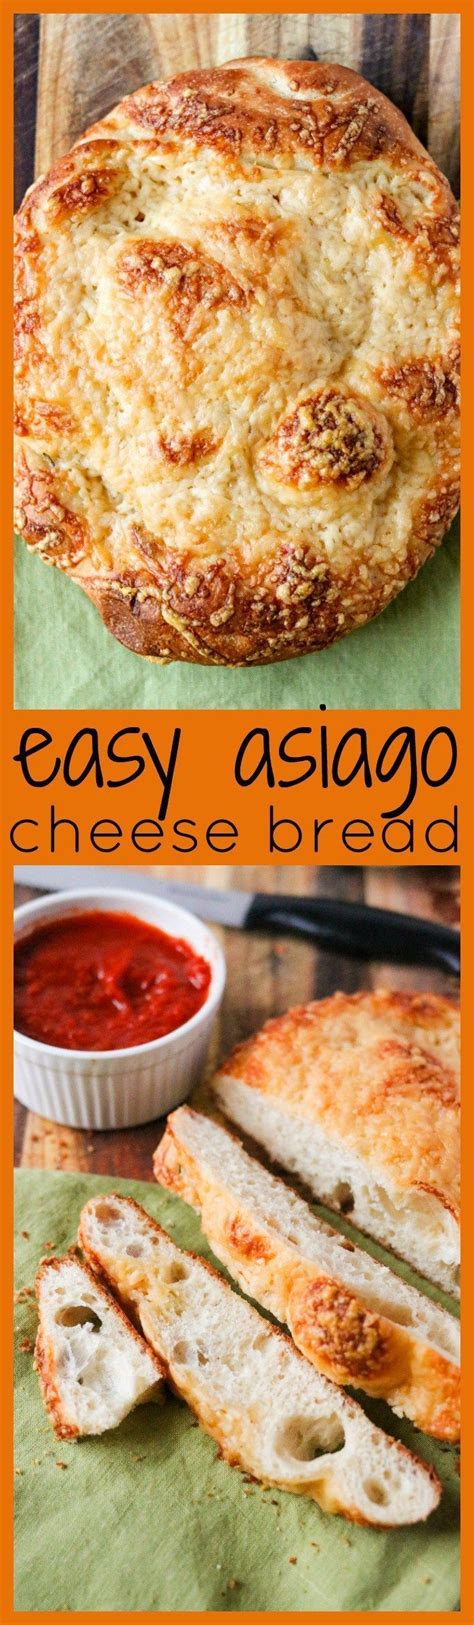 This Easy Asiago Cheese Bread Is Made From Store Bought Pizza Dough So